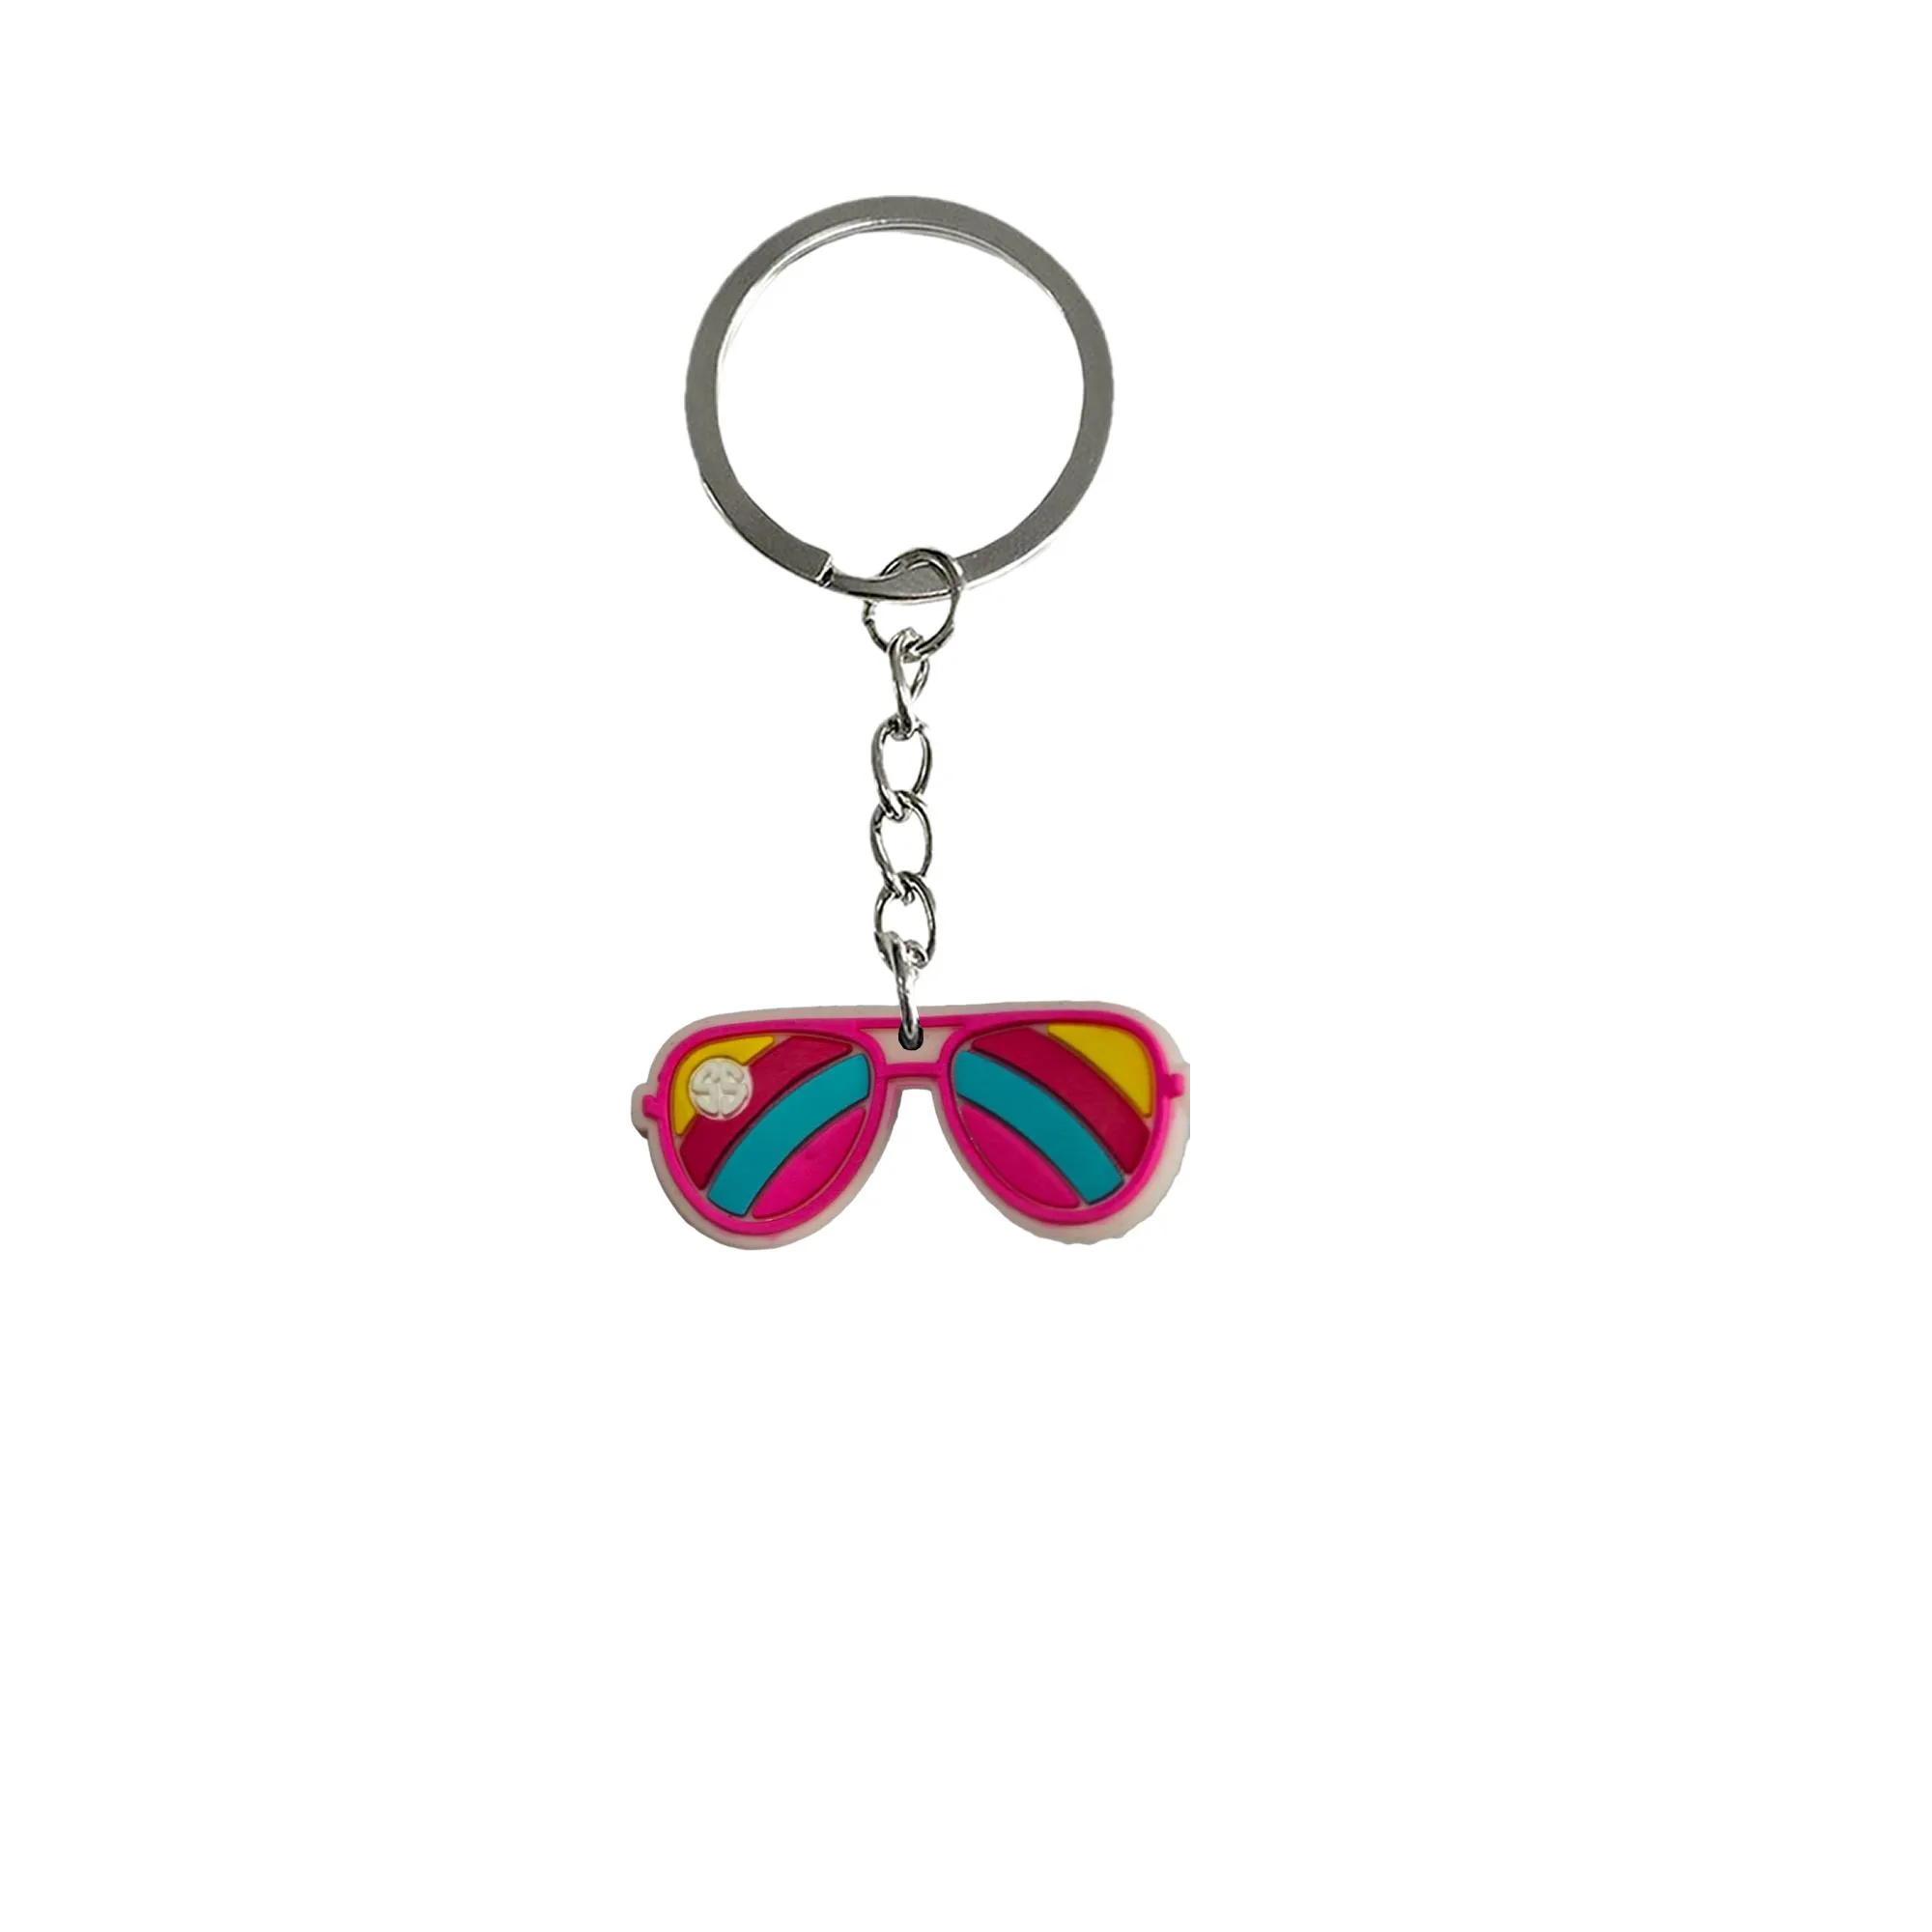 glasses keychain key chain for party favors gift kids ring women keyring suitable schoolbag keychains men car bag keyrings bags